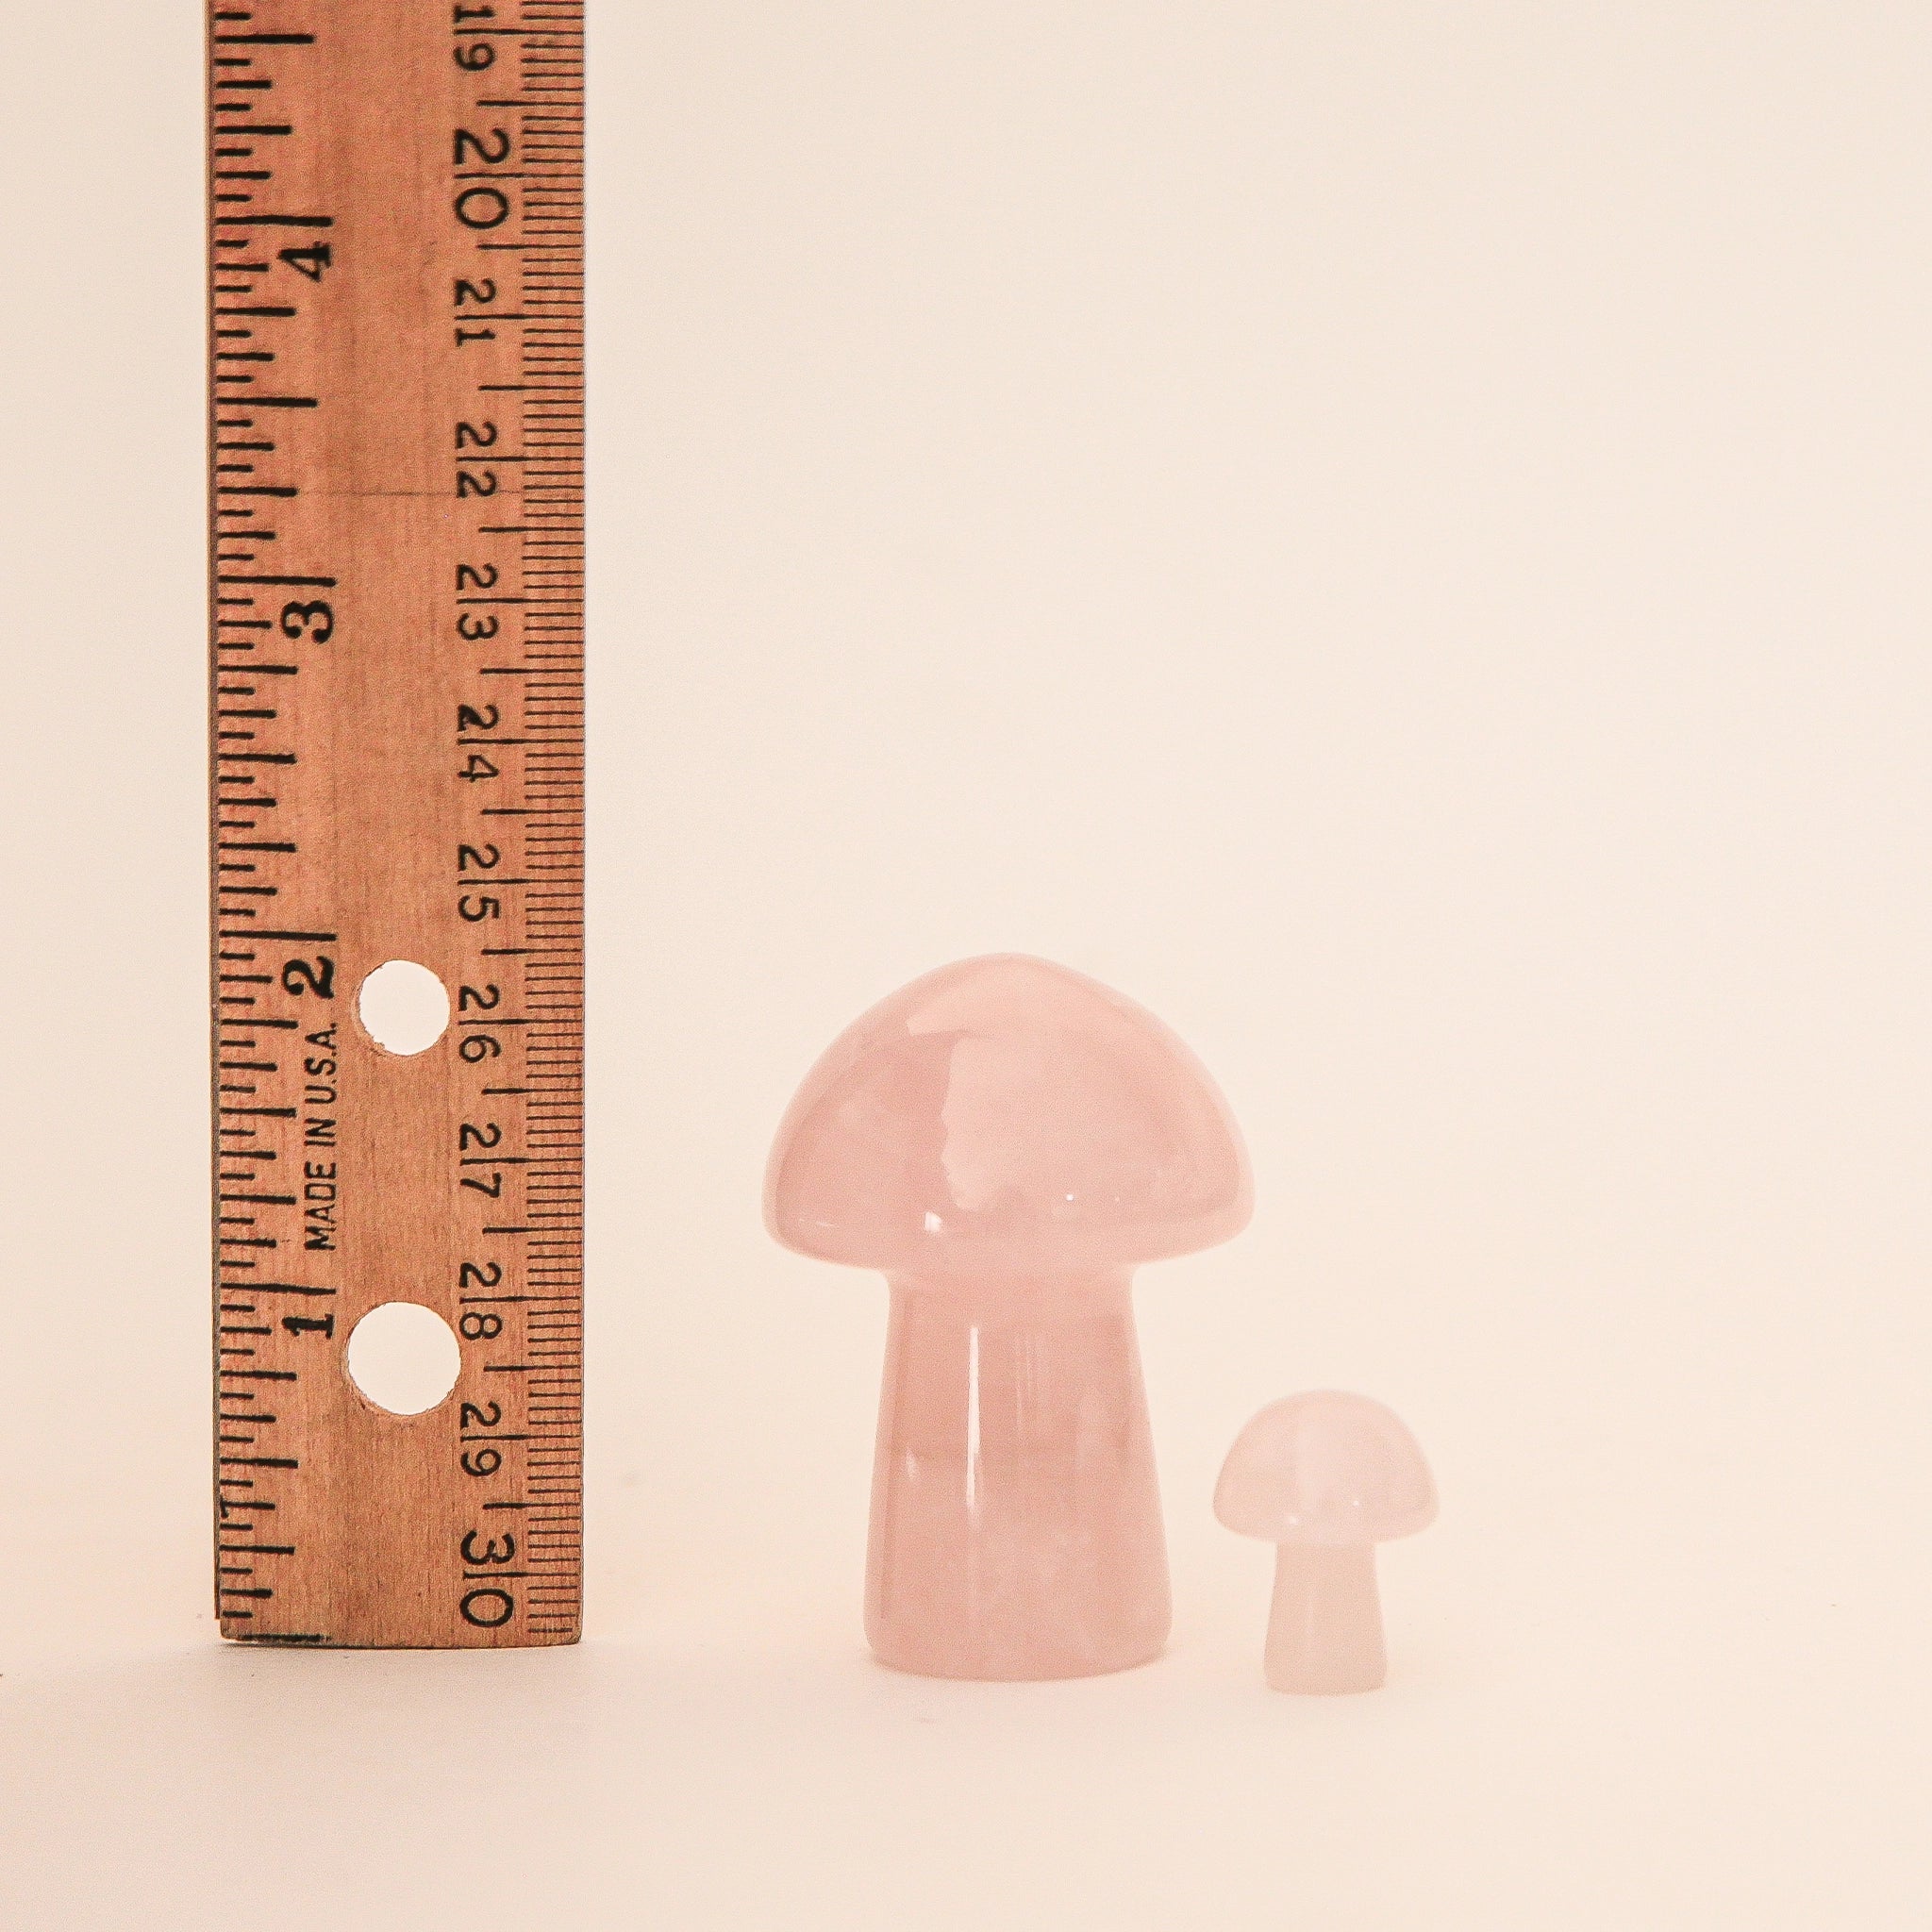 On a tan background is the larger rose quartz mushroom next to the mini version along with a ruler to show the height difference. 